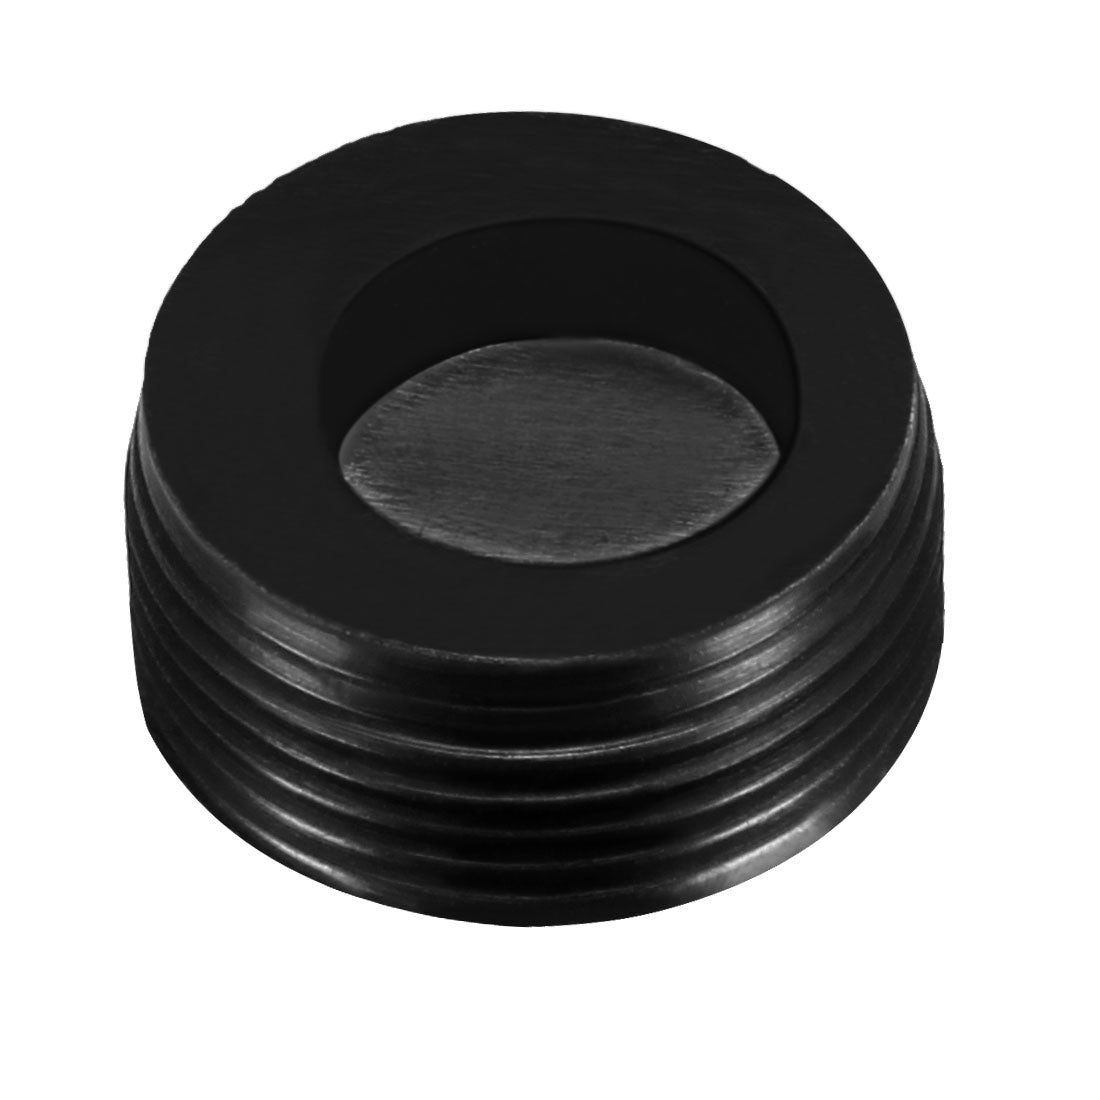 uxcell Uxcell Carbon Brush Holder Caps 17mm O.D. 9.5mm I.D. 7.7mm Thickness Motor Brush Cover Plastic Fitting Thread Black 2pcs